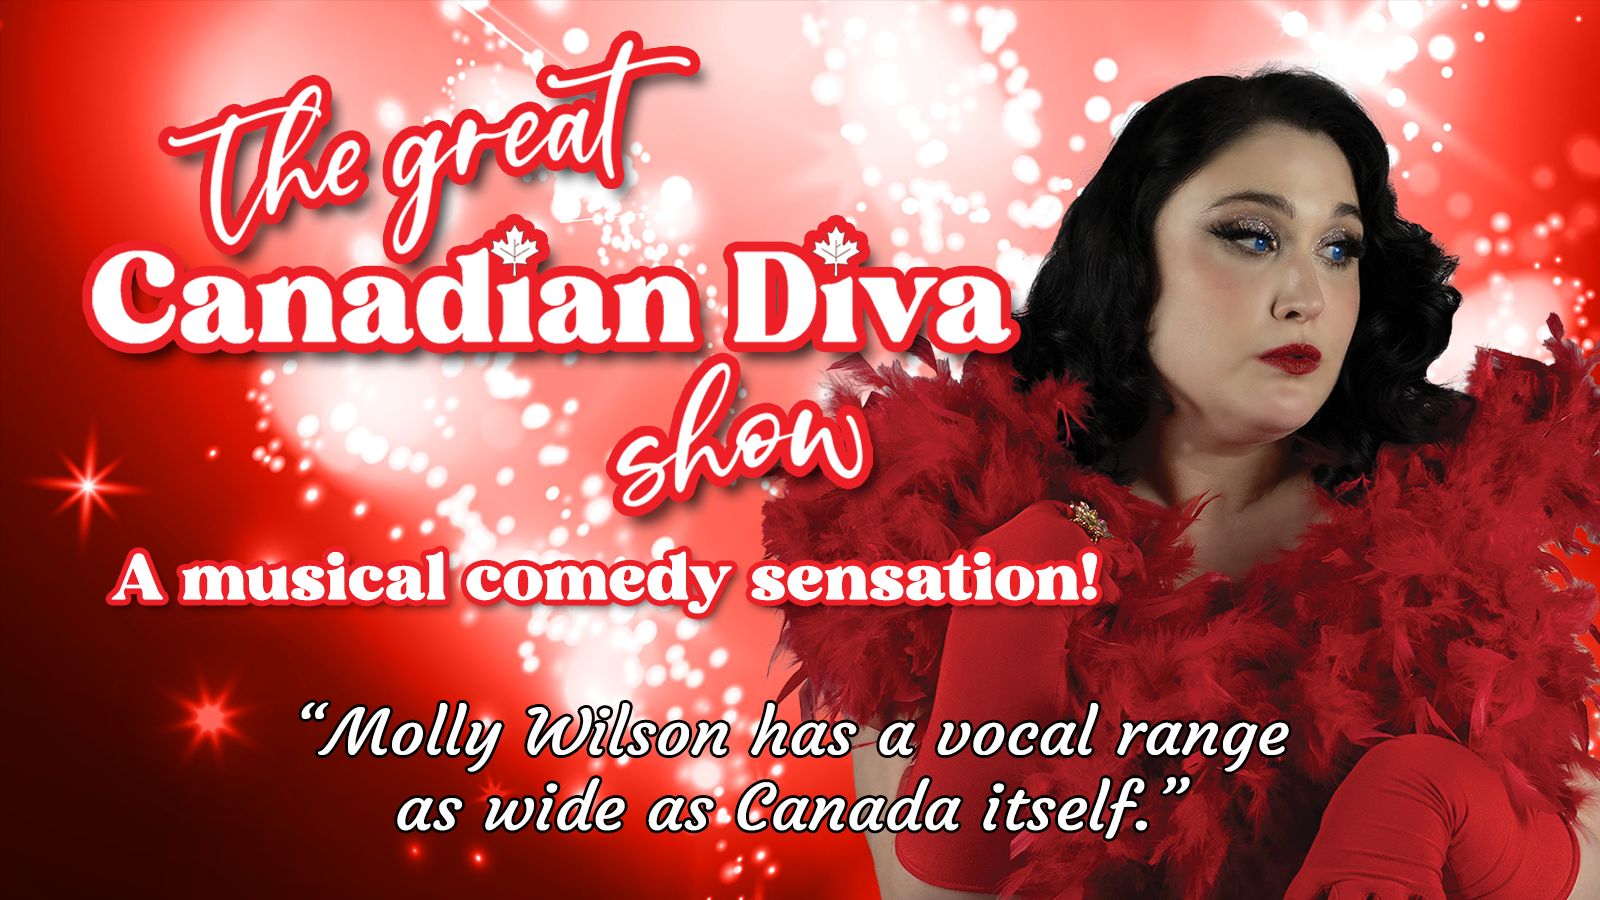 The Great Canadian Diva Show, Port Moody, British Columbia, Canada